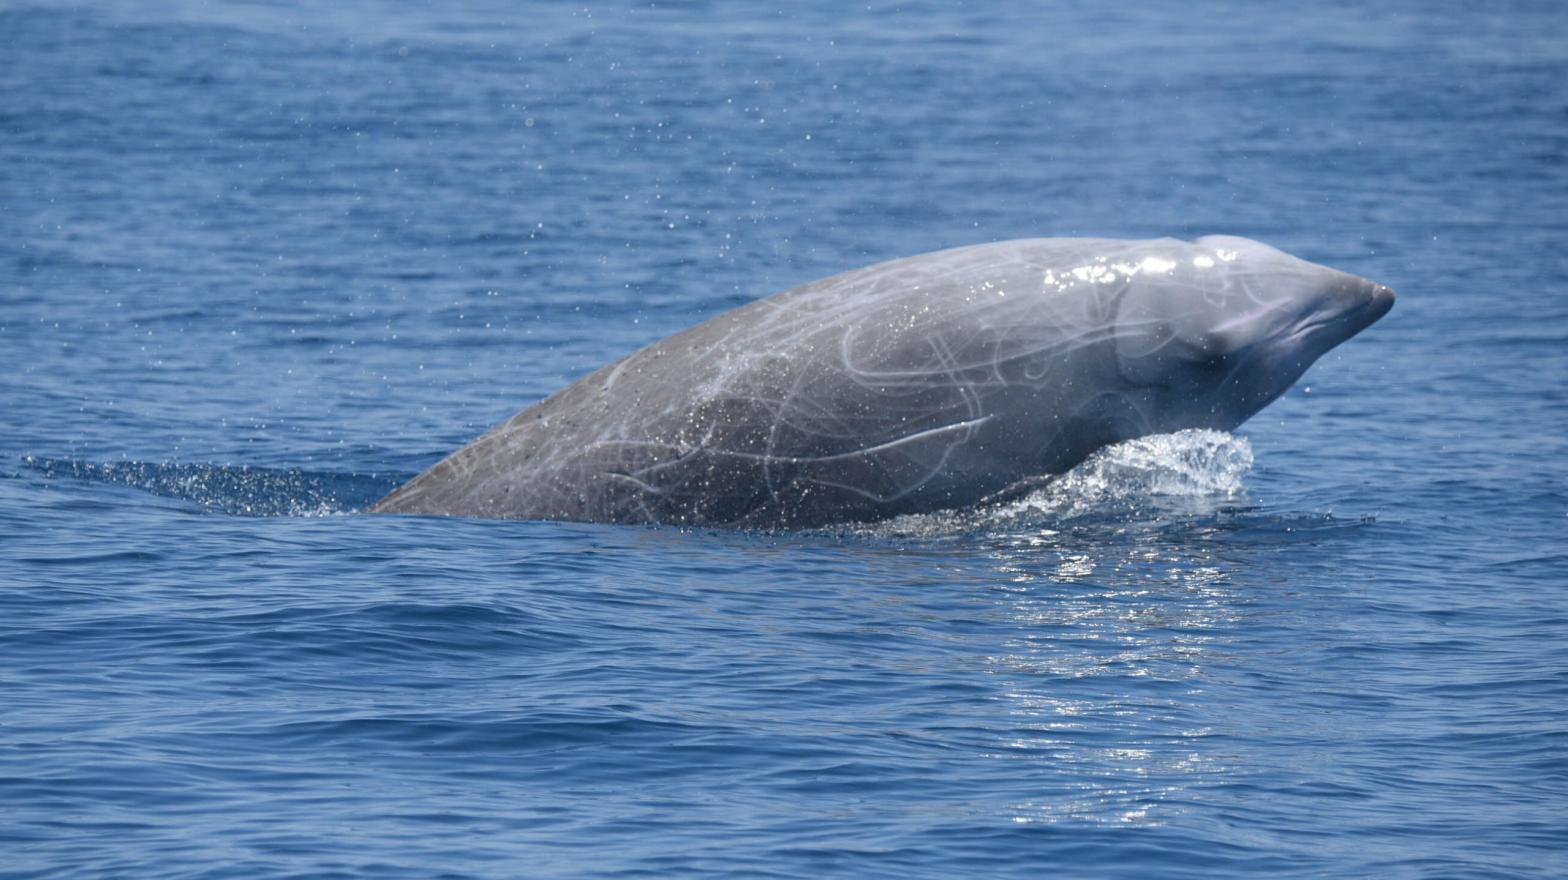 A Cuvier's beaked whale (not the same individual described in the new study). (Image: NOAA)